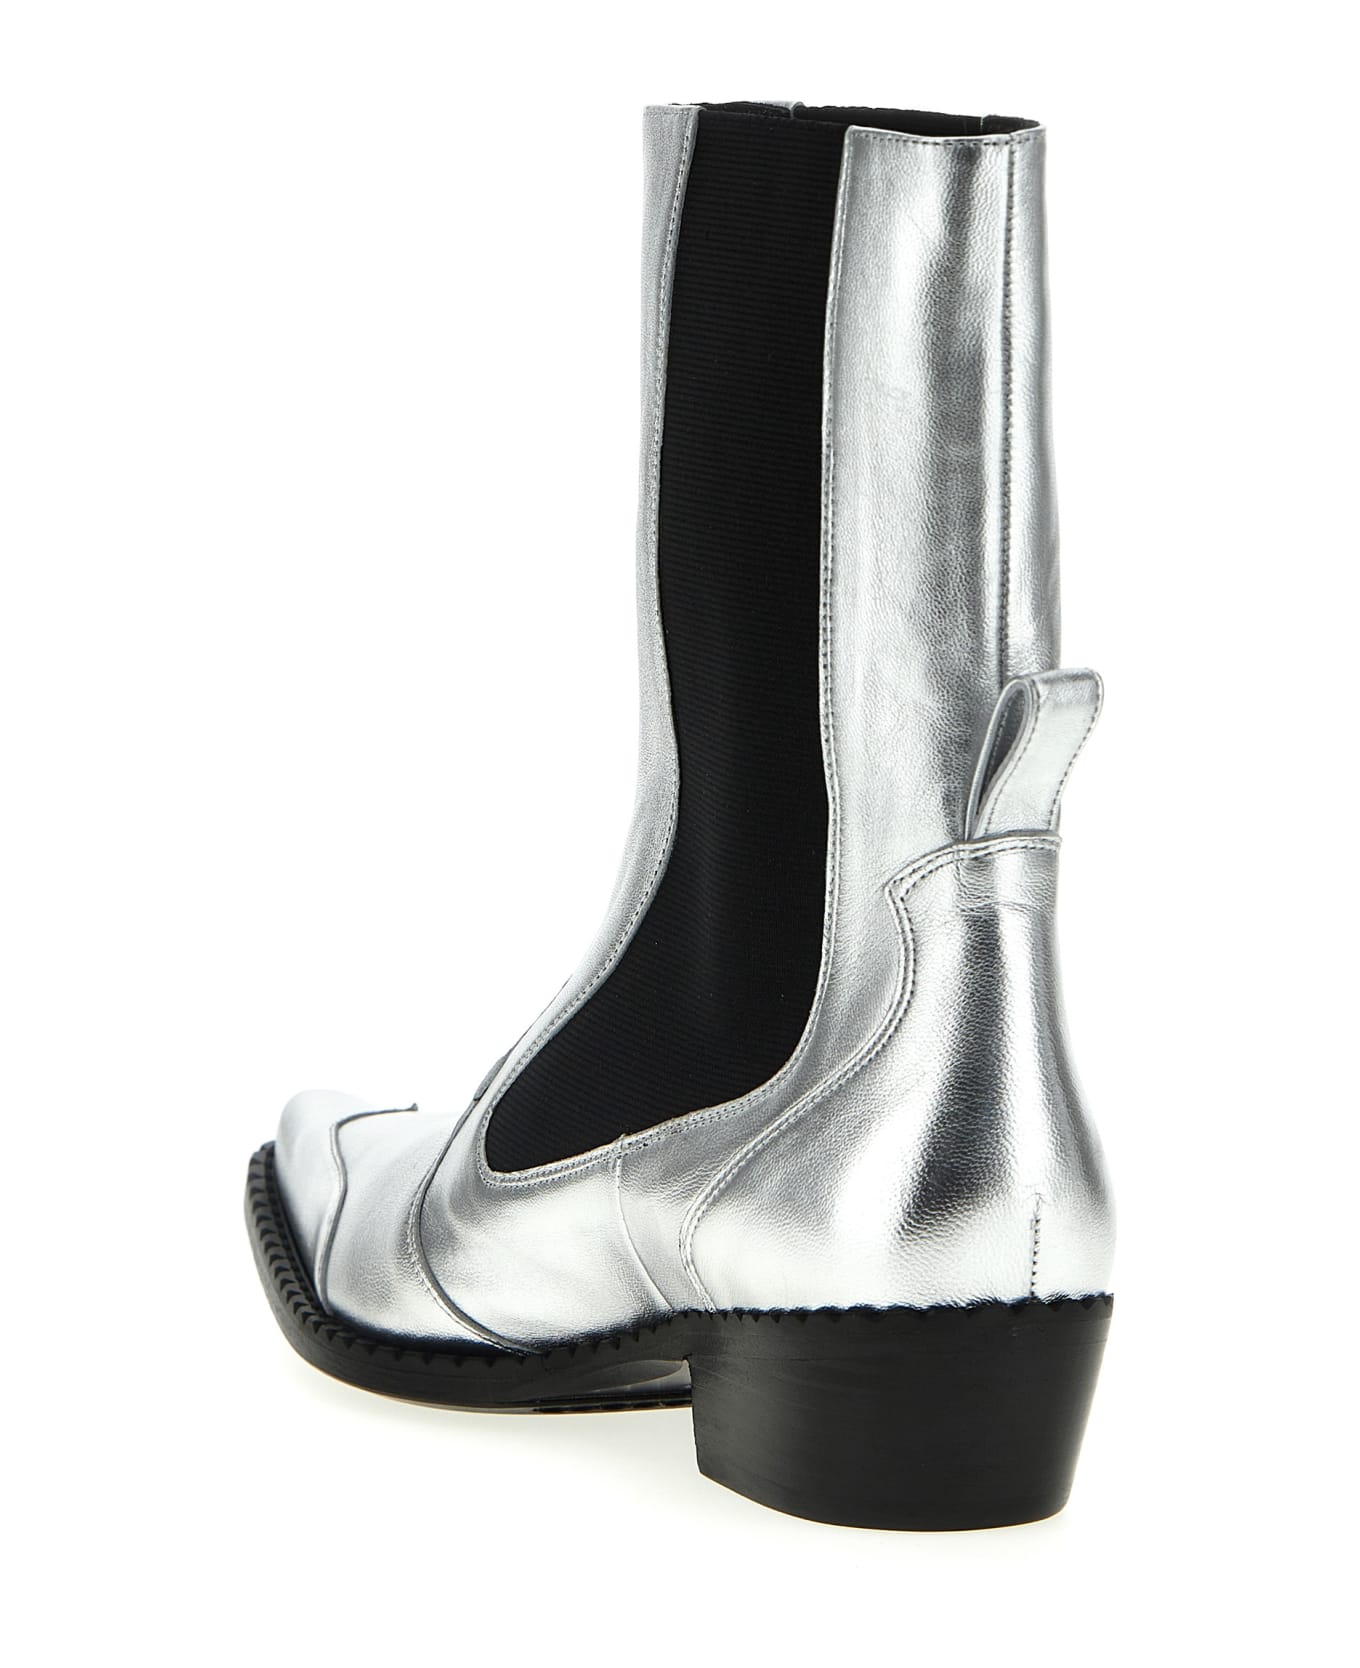 BY FAR 'otis' Ankle Boots - Silver